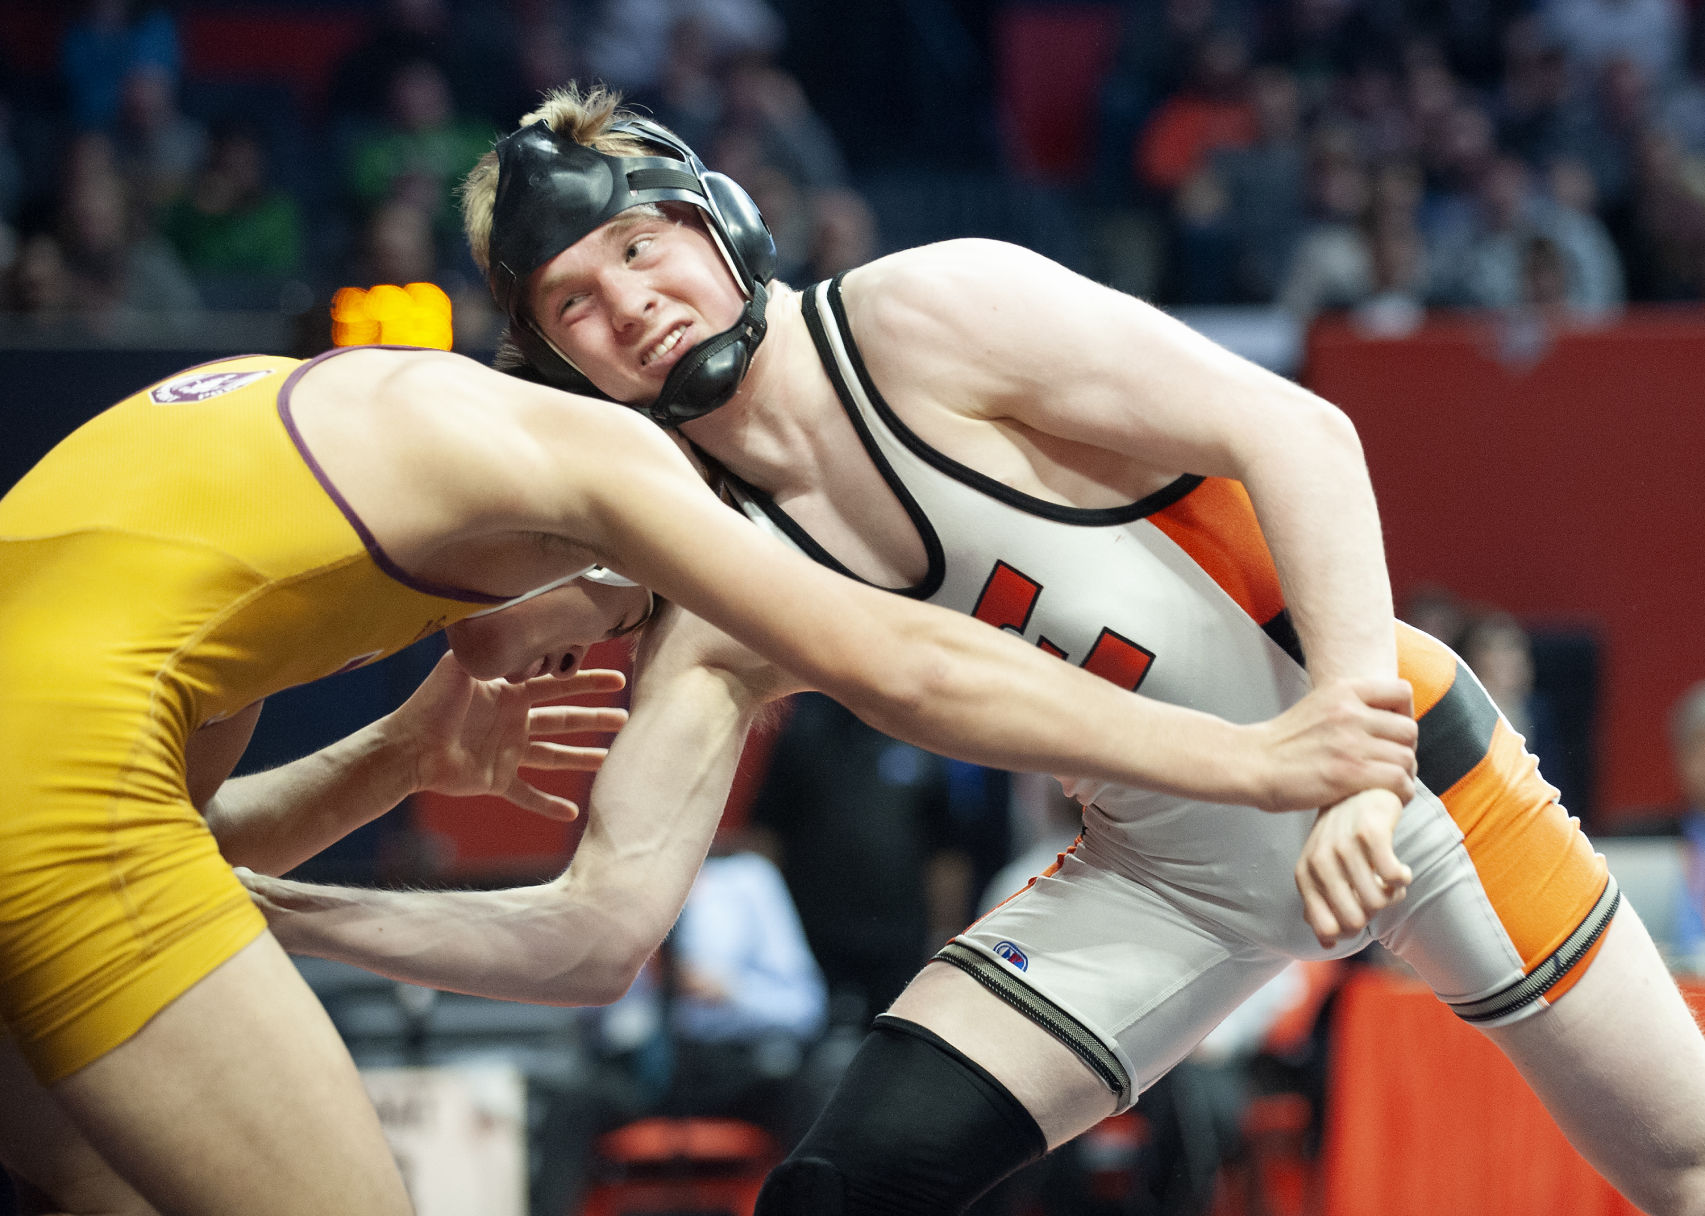 Edwardsville, Triad take aim on advancing past dual sectionals